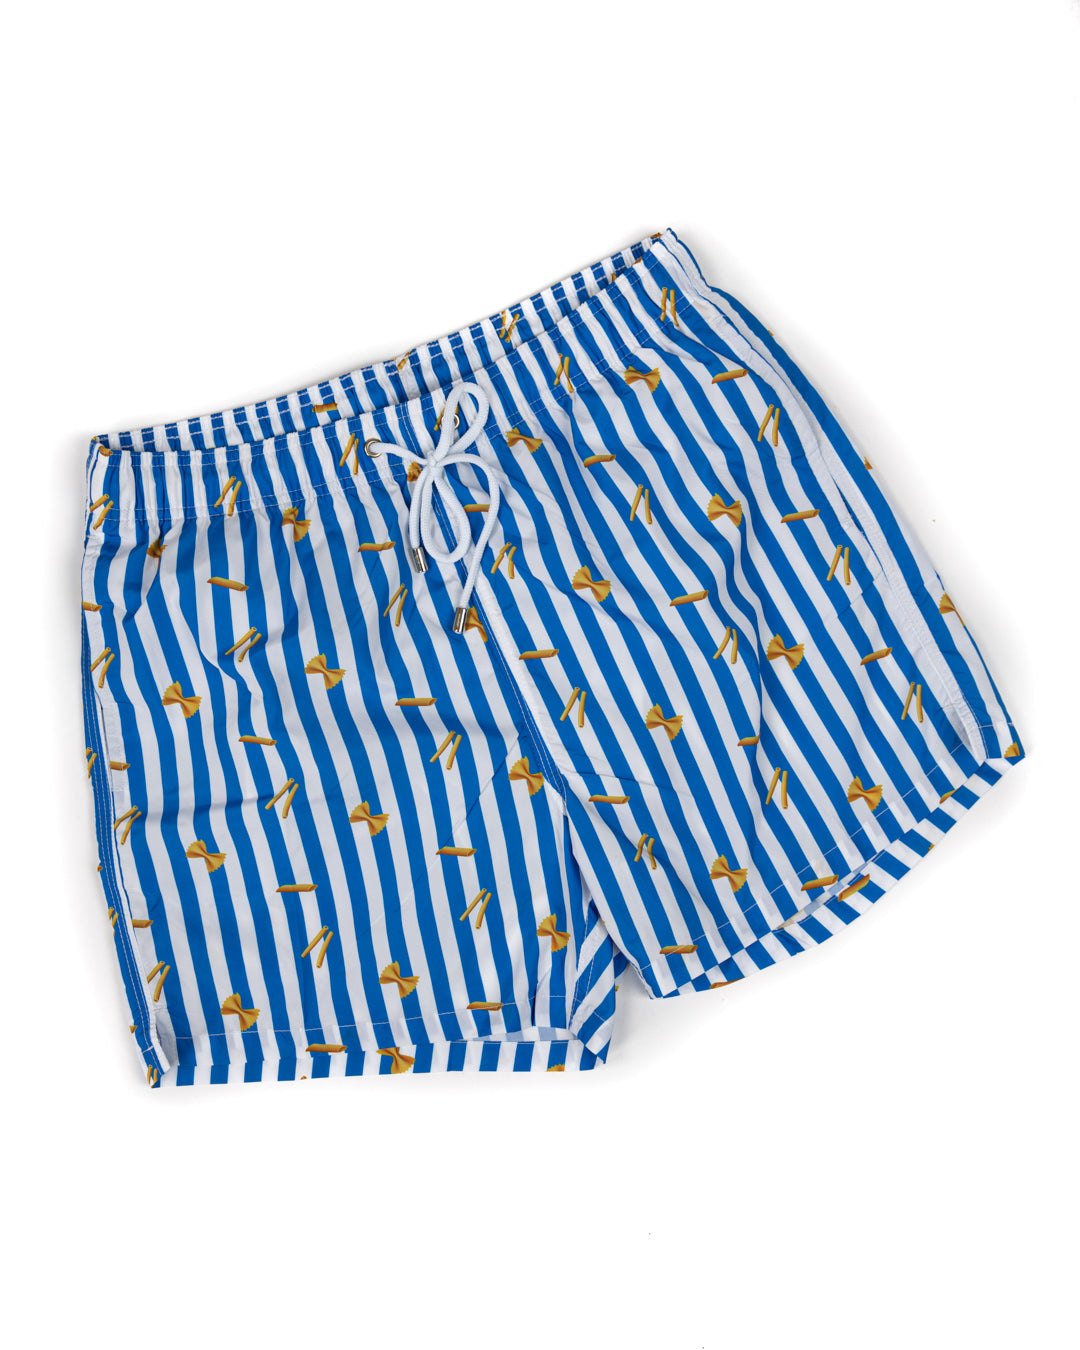 Swimsuit - Pasta pattern with light blue stripes